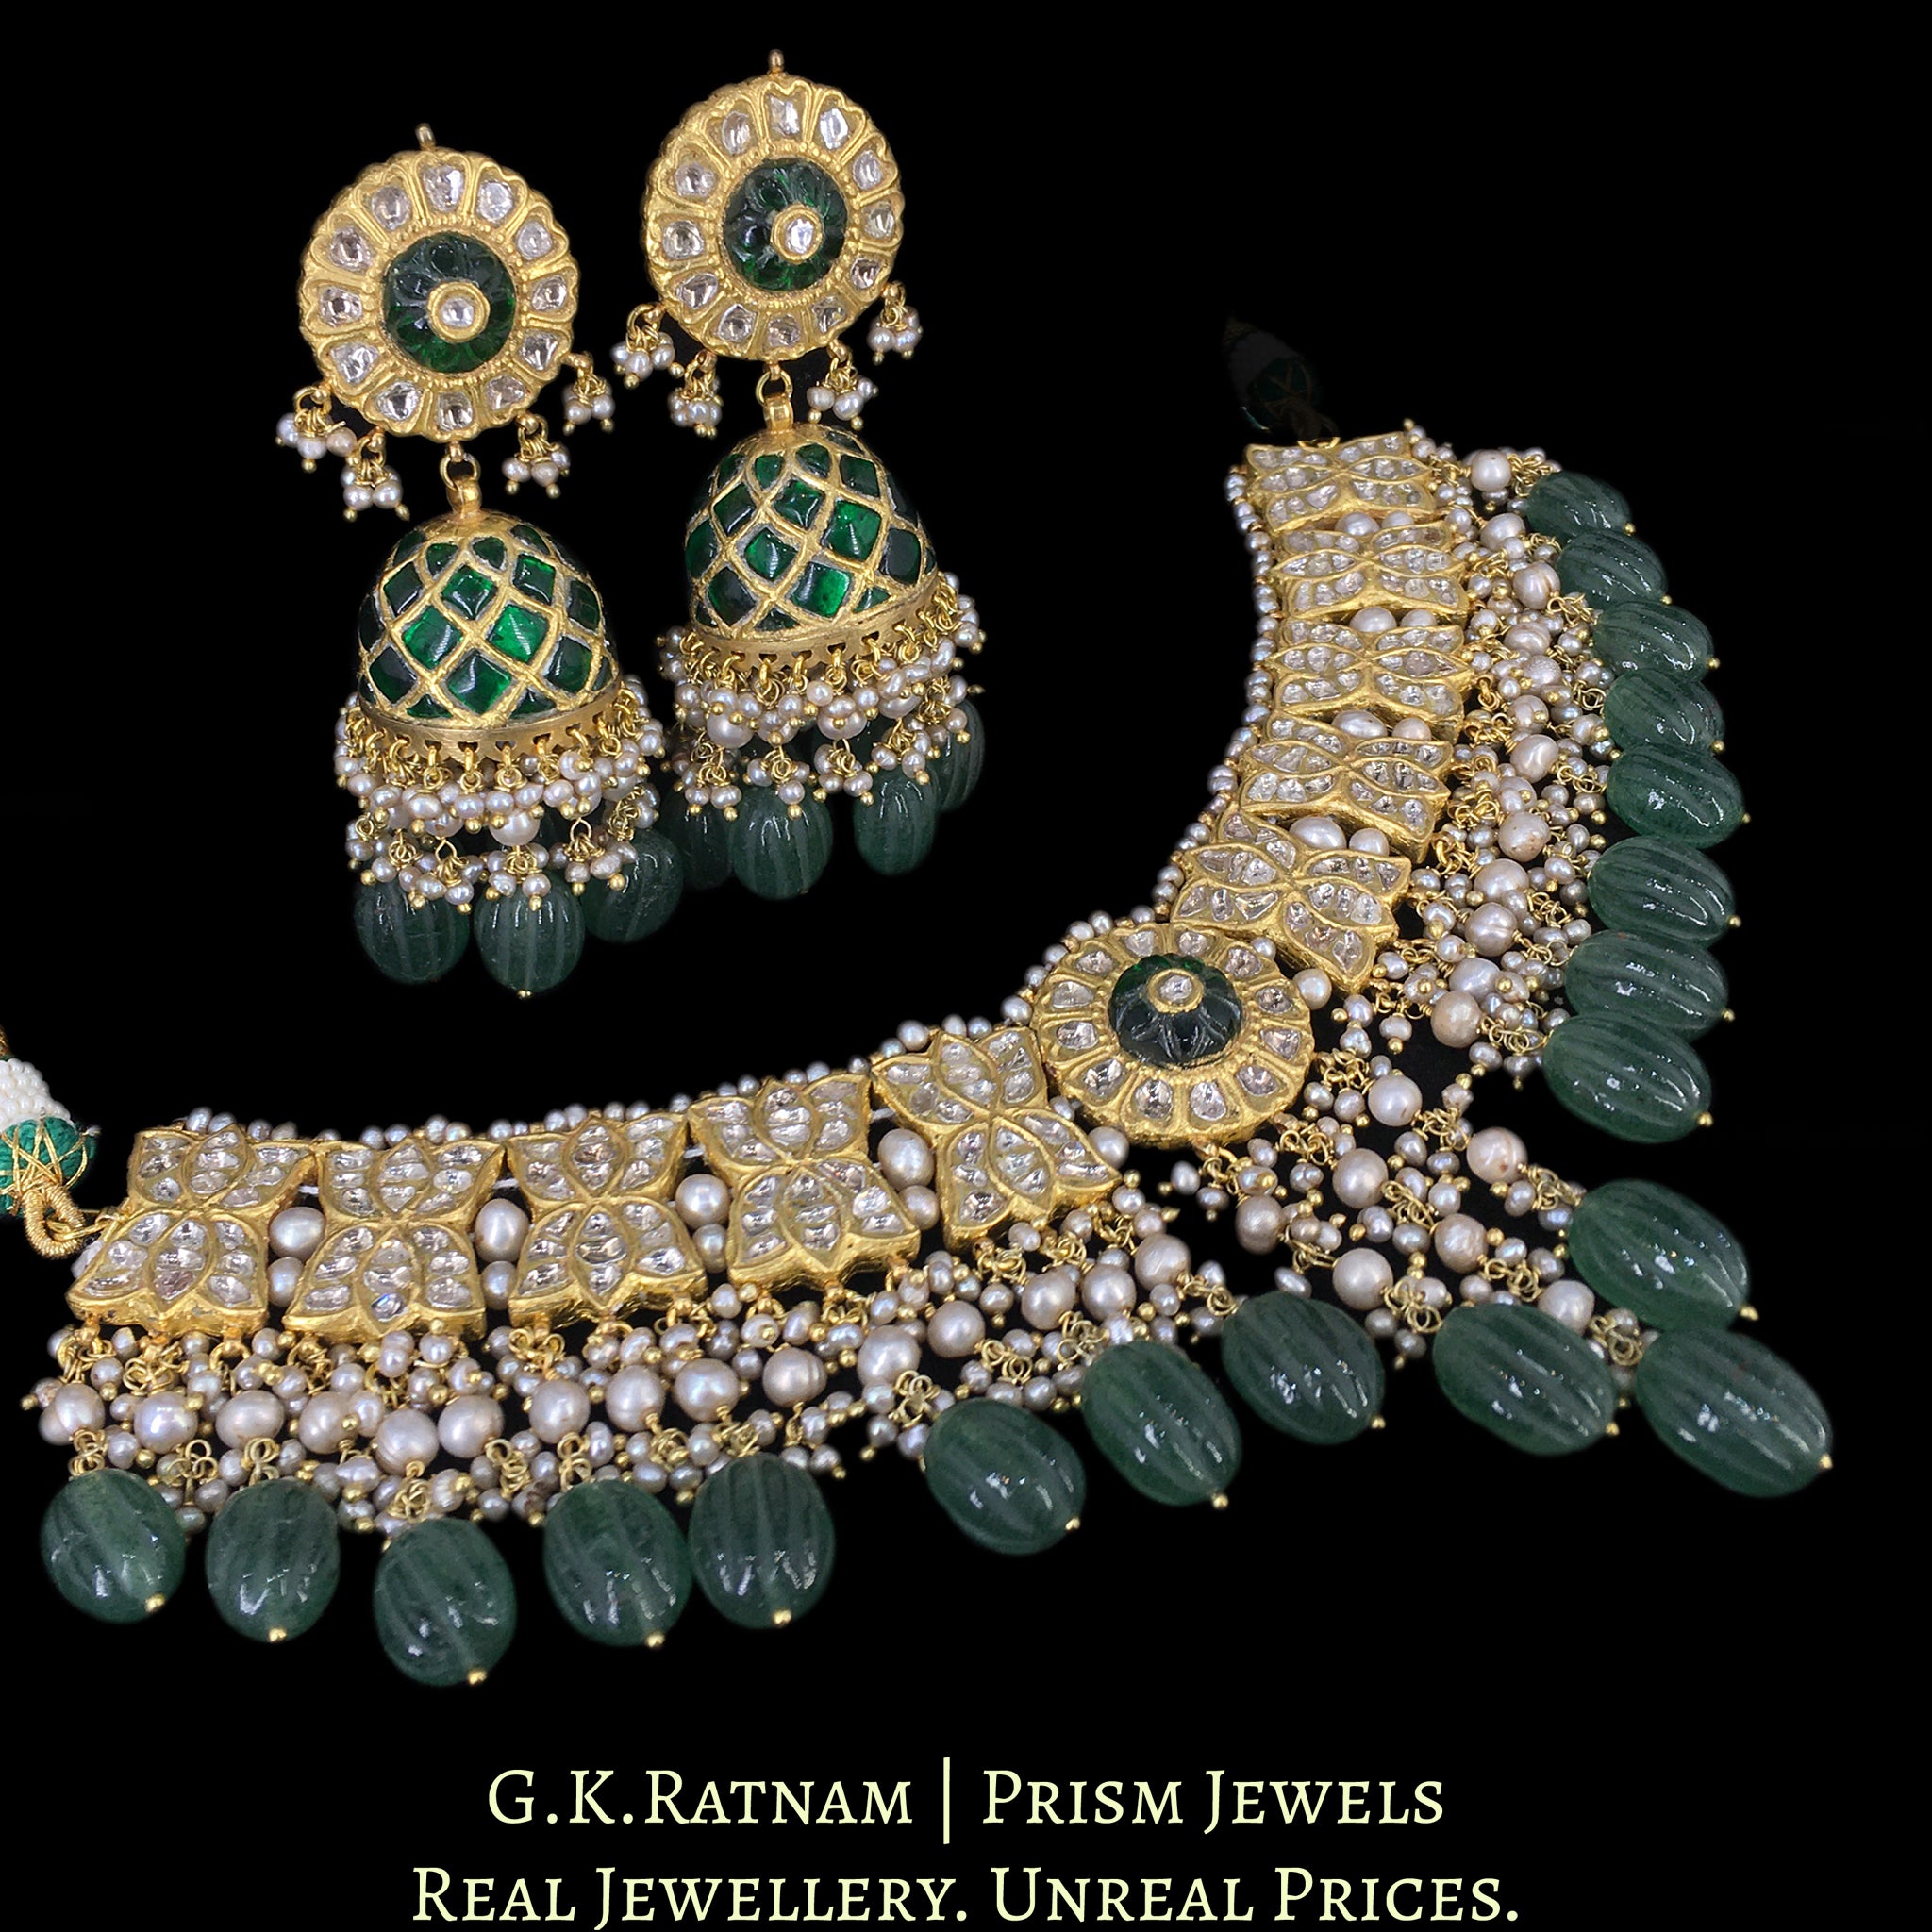 23k Gold and Diamond Polki Choker Necklace Set with basra-like Antiqued Pearls and hand-carved Melons